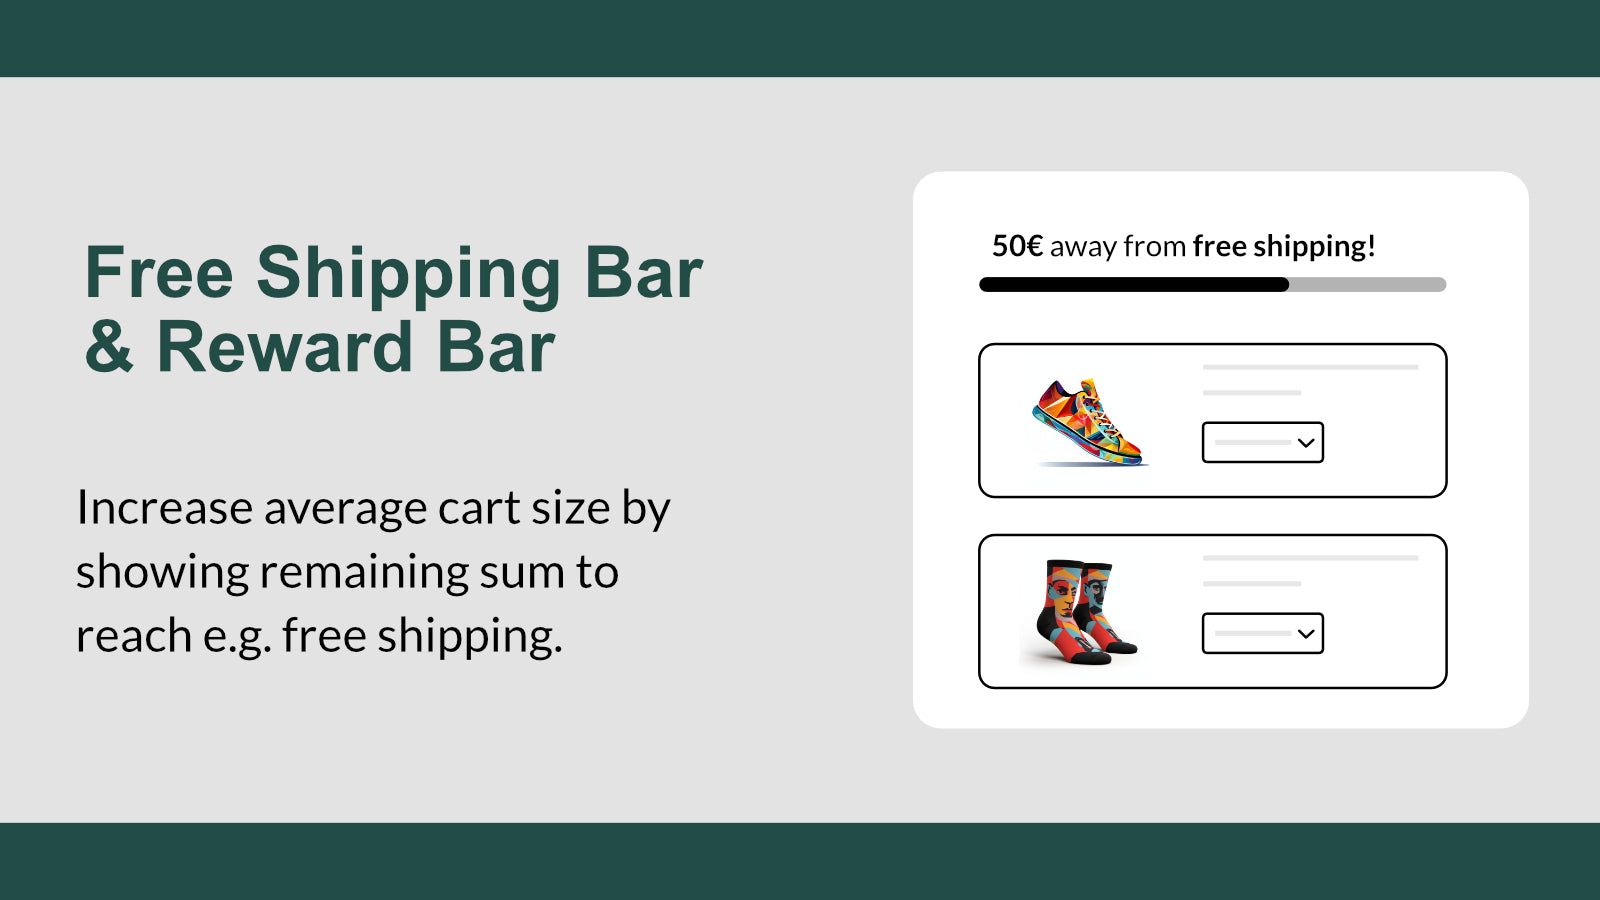 Increase average cart size by showing a free-shipping bar.